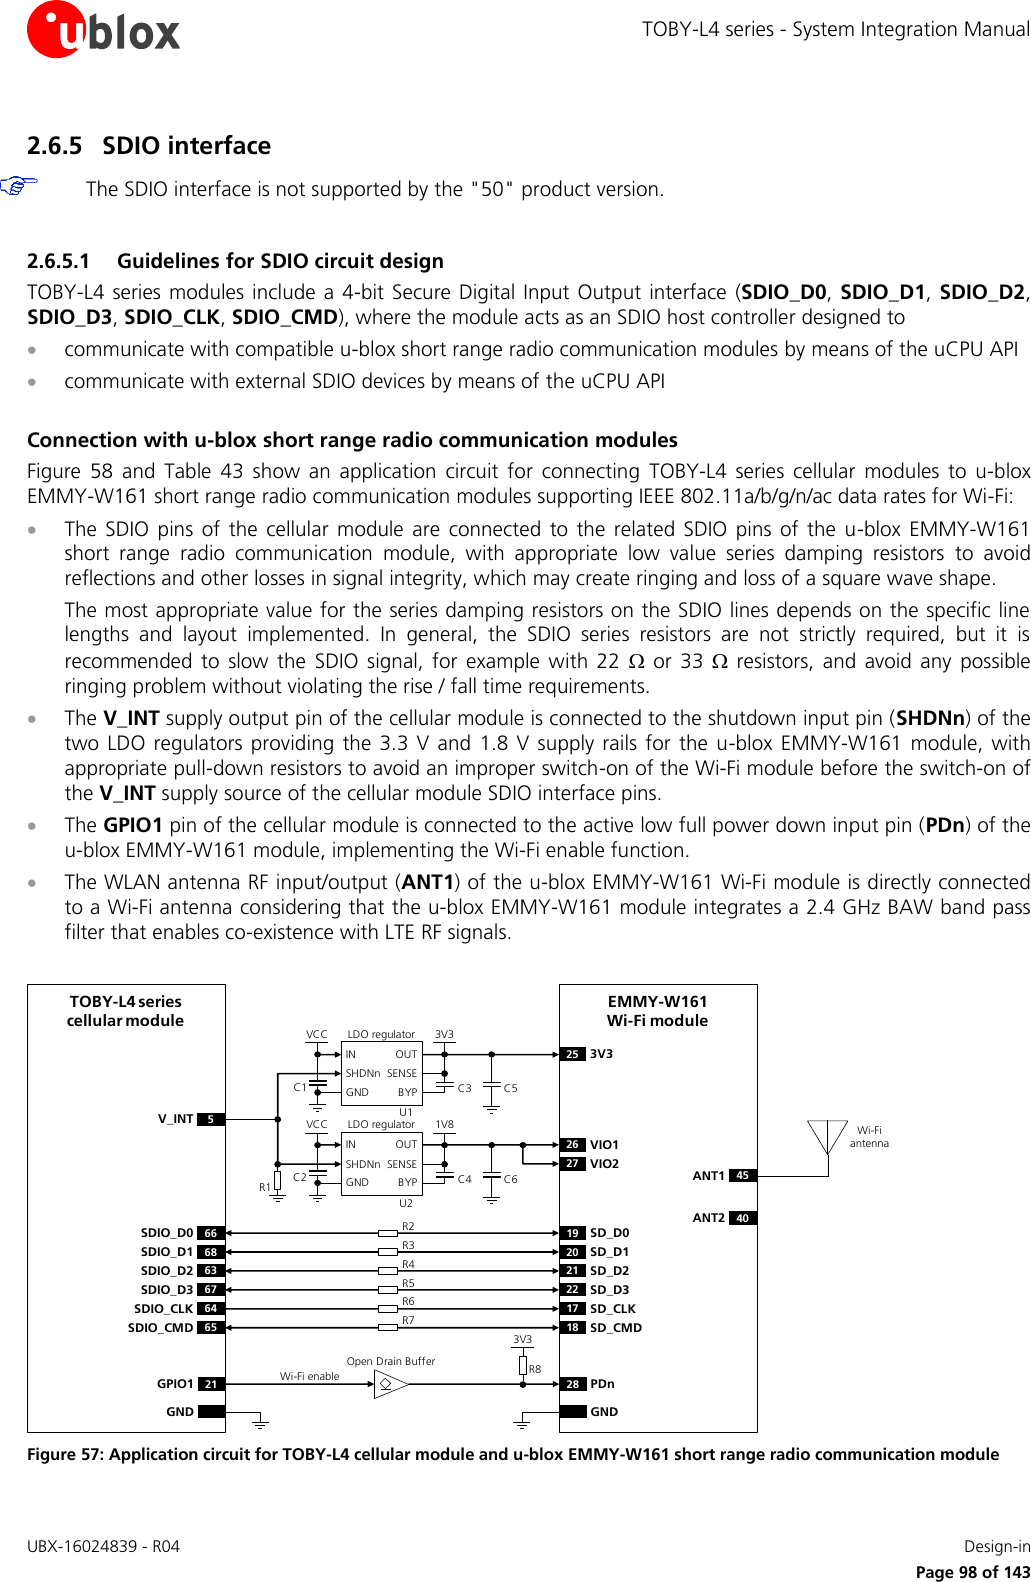 TOBY-L4 series - System Integration Manual UBX-16024839 - R04    Design-in     Page 98 of 143 2.6.5 SDIO interface  The SDIO interface is not supported by the &quot;50&quot; product version.  2.6.5.1 Guidelines for SDIO circuit design TOBY-L4  series  modules  include a  4-bit Secure  Digital Input Output  interface (SDIO_D0,  SDIO_D1,  SDIO_D2, SDIO_D3, SDIO_CLK, SDIO_CMD), where the module acts as an SDIO host controller designed to   communicate with compatible u-blox short range radio communication modules by means of the uCPU API  communicate with external SDIO devices by means of the uCPU API   Connection with u-blox short range radio communication modules  Figure  58  and  Table  43  show  an  application  circuit  for  connecting  TOBY-L4  series  cellular  modules  to  u-blox EMMY-W161 short range radio communication modules supporting IEEE 802.11a/b/g/n/ac data rates for Wi-Fi:  The  SDIO  pins  of  the  cellular  module  are  connected  to  the  related  SDIO  pins  of  the  u-blox EMMY-W161 short  range  radio  communication  module,  with  appropriate  low  value  series  damping  resistors  to  avoid reflections and other losses in signal integrity, which may create ringing and loss of a square wave shape.  The most appropriate value for the series damping resistors on the SDIO lines depends on the specific line lengths  and  layout  implemented.  In  general,  the  SDIO  series  resistors  are  not  strictly  required,  but  it  is recommended  to  slow  the  SDIO  signal,  for  example  with  22    or  33    resistors,  and  avoid  any  possible ringing problem without violating the rise / fall time requirements.   The V_INT supply output pin of the cellular module is connected to the shutdown input pin (SHDNn) of the two  LDO  regulators  providing  the  3.3 V  and  1.8  V supply rails  for the  u-blox  EMMY-W161 module,  with appropriate pull-down resistors to avoid an improper switch-on of the Wi-Fi module before the switch-on of the V_INT supply source of the cellular module SDIO interface pins.  The GPIO1 pin of the cellular module is connected to the active low full power down input pin (PDn) of the u-blox EMMY-W161 module, implementing the Wi-Fi enable function.  The WLAN antenna RF input/output (ANT1) of the u-blox EMMY-W161 Wi-Fi module is directly connected to a Wi-Fi antenna considering that the u-blox EMMY-W161 module integrates a 2.4 GHz BAW band pass filter that enables co-existence with LTE RF signals.   R2LDO regulatorEMMY-W161Wi-Fi module3V3VCCU1C1R1SD_D019SD_D120SD_D221SD_D322SD_CLK17SD_CMD18OUTINSENSEBYPSHDNnGNDTOBY-L4 series cellular moduleSDIO_D0 66SDIO_D1 68SDIO_D2 63SDIO_D3 67SDIO_CLK 64SDIO_CMD 65V_INT 5C33V325C5LDO regulator 1V8VCCU2C2OUTINSENSEBYPSHDNnGND C4VIO126C6VIO227R3R4R5R6R7ANT1 45ANT2 40Wi-Fi antennaWi-Fi enable PDn28GPIO1 21GNDGND3V3Open Drain Buffer R8 Figure 57: Application circuit for TOBY-L4 cellular module and u-blox EMMY-W161 short range radio communication module 